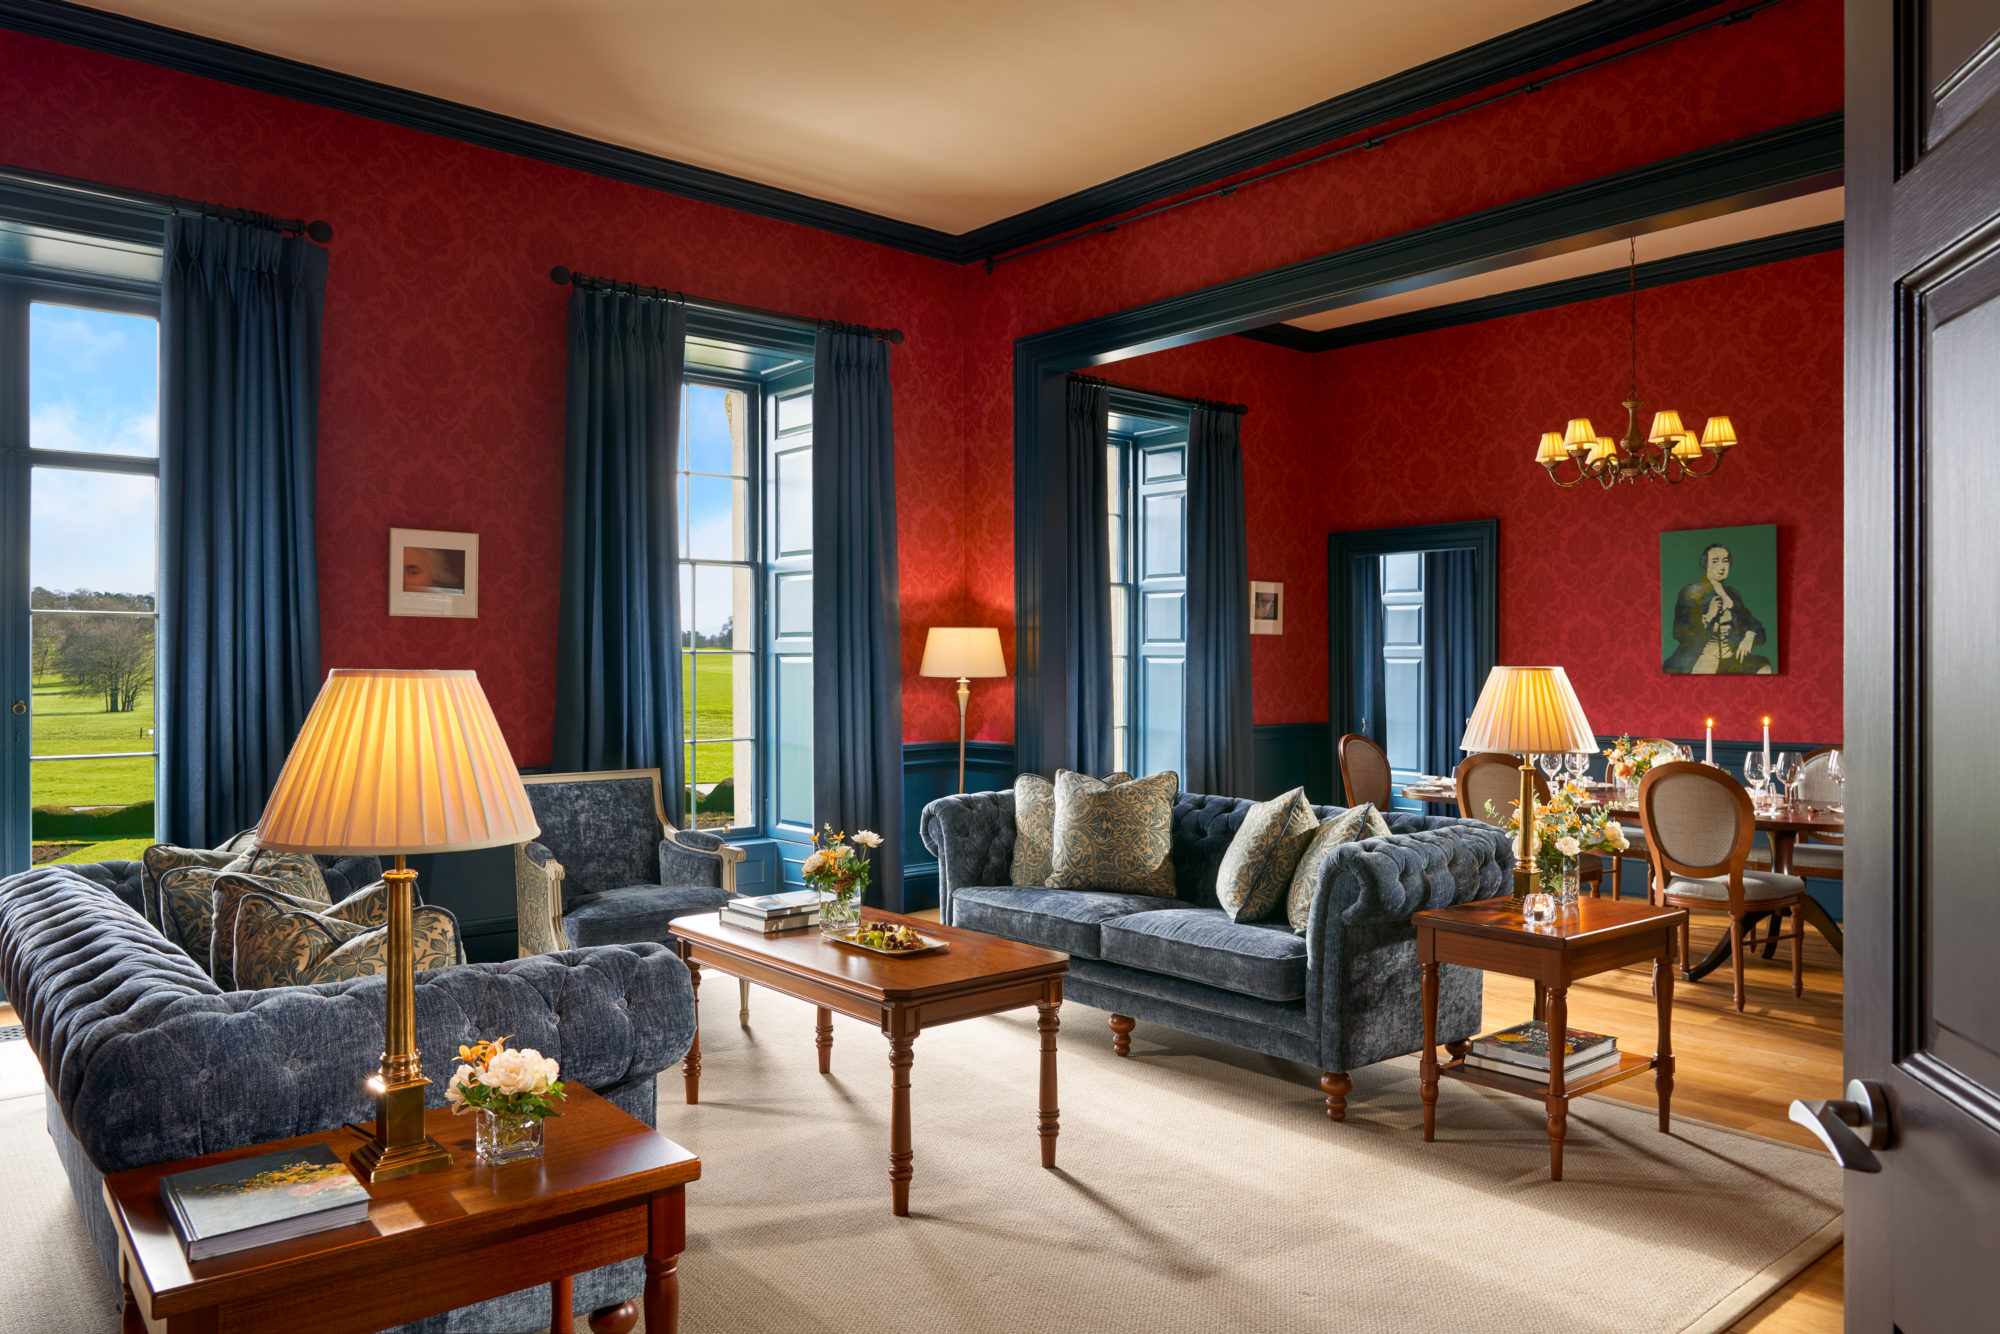 Carton House_a Fairmont Managed Hotel_House Presidential Suite at Carton House (c) Barry Murphy